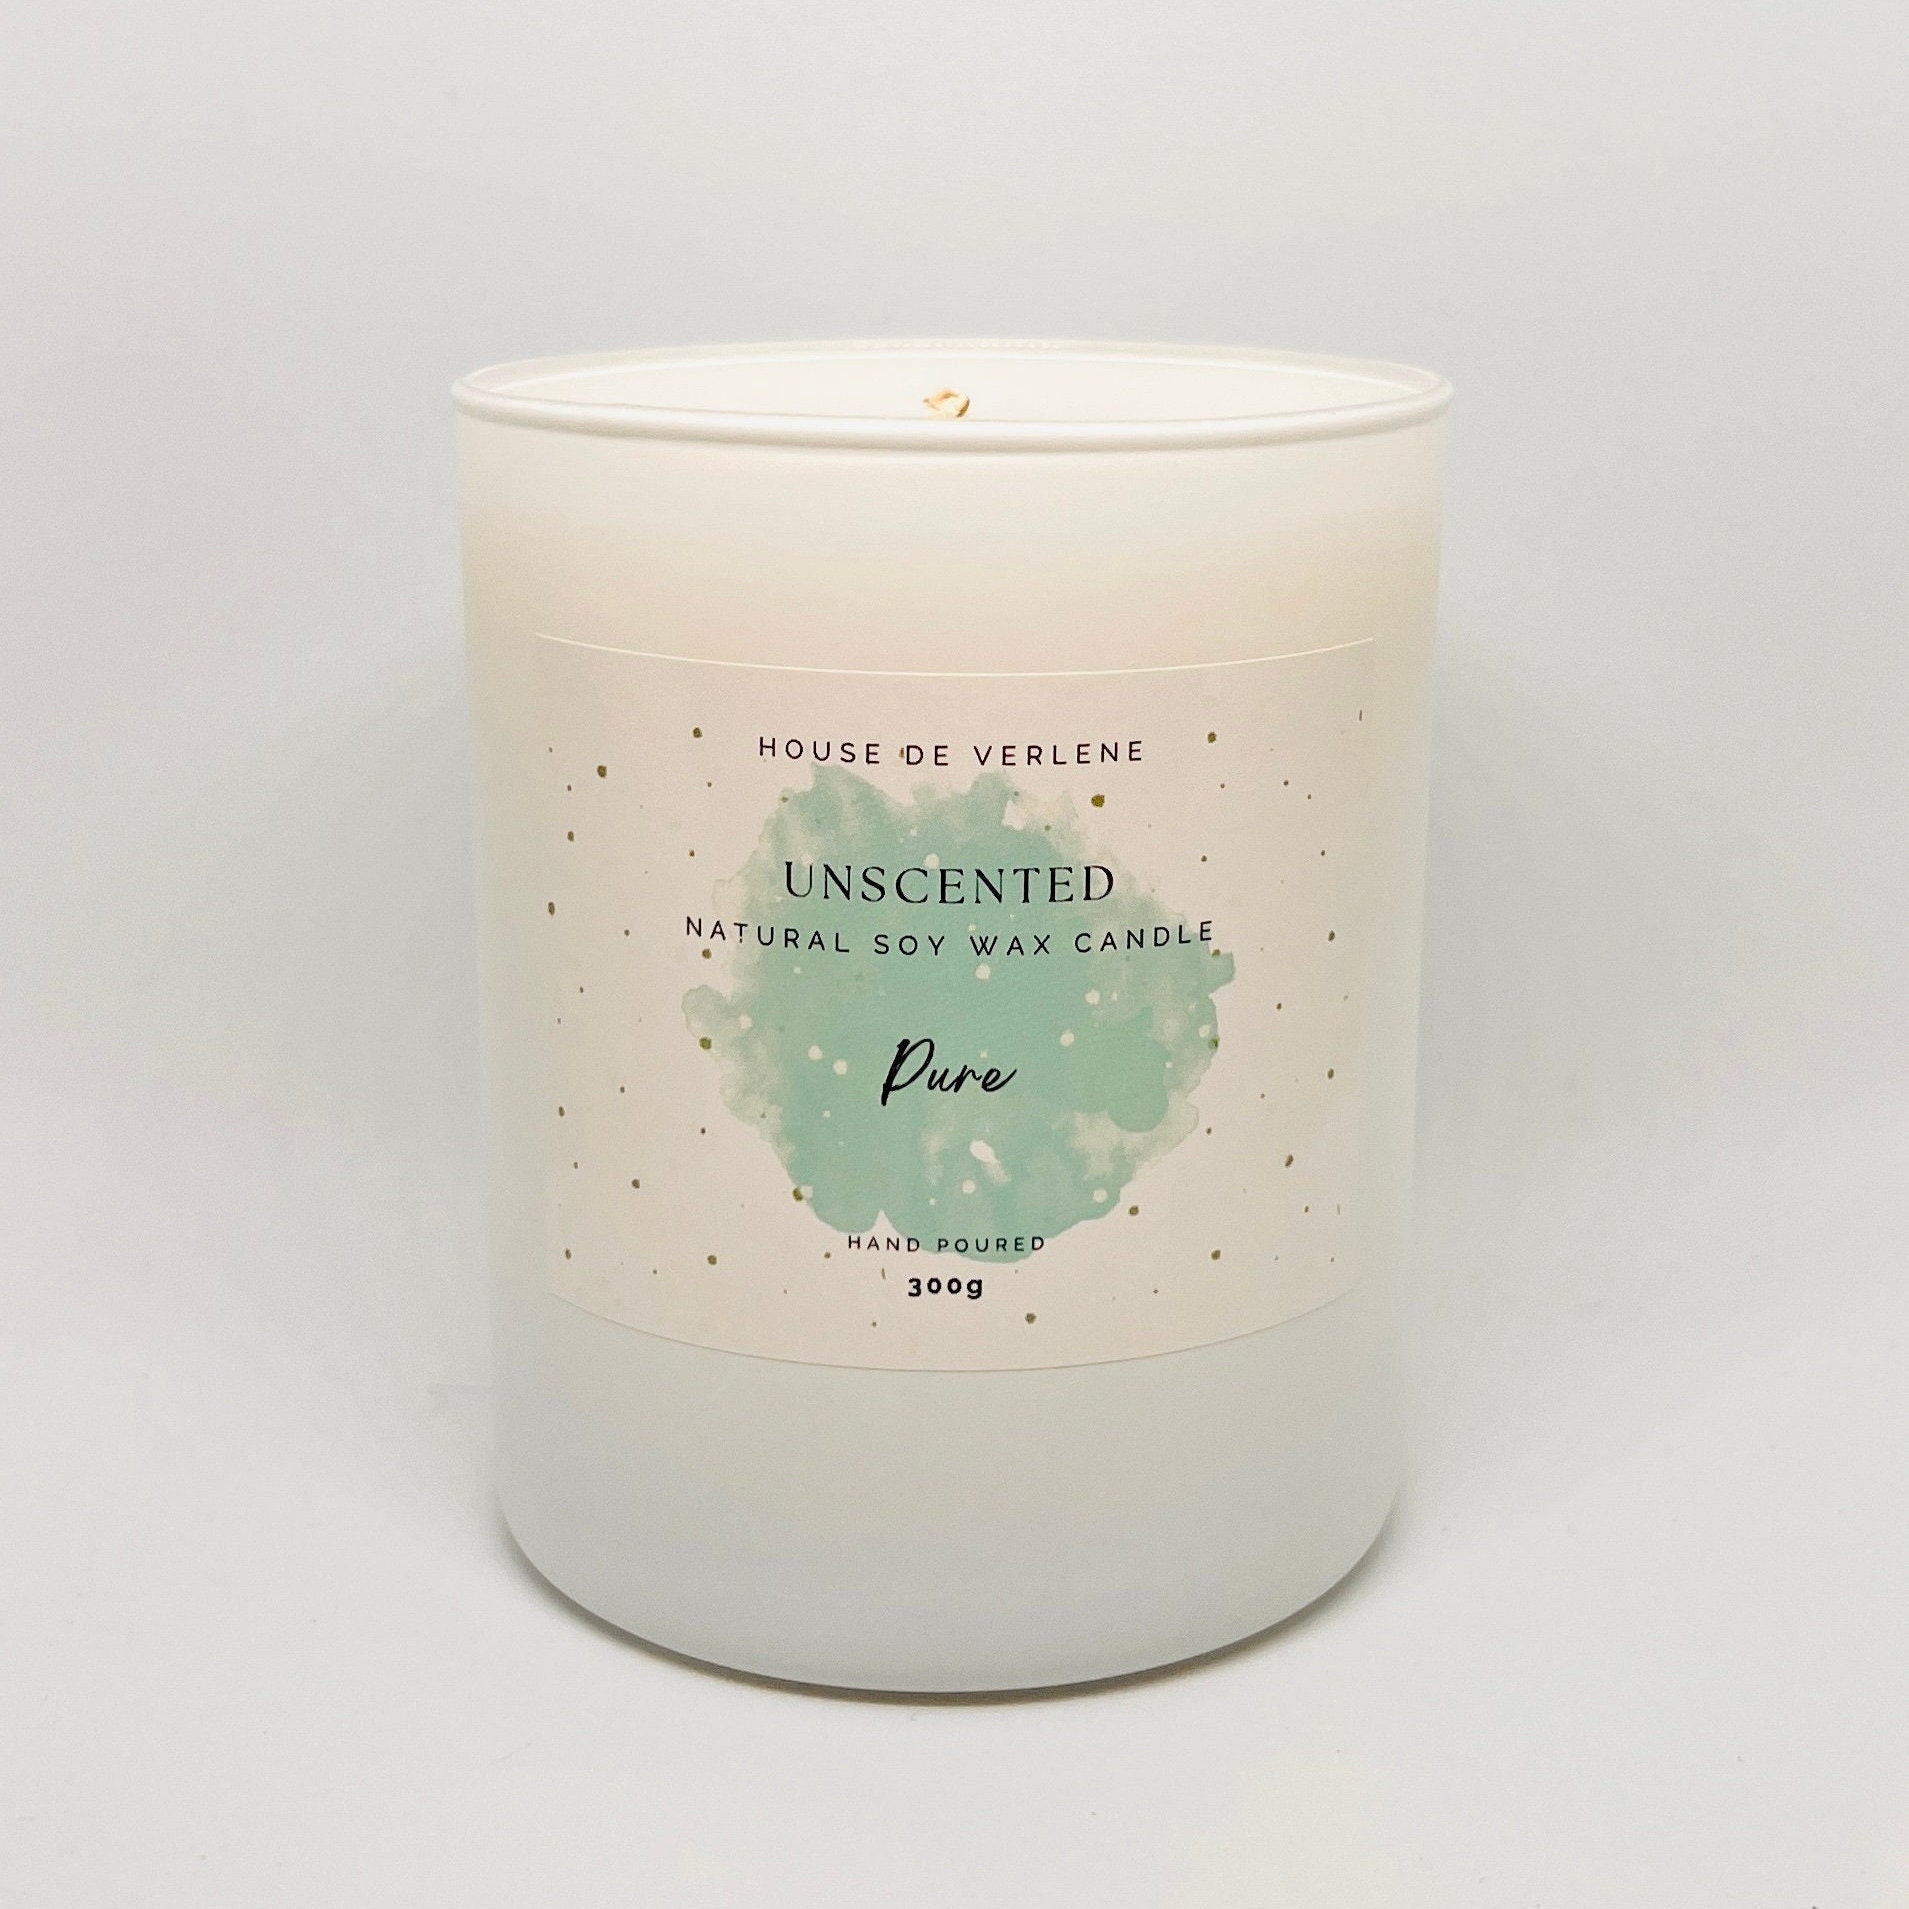 Encounter FREEDOM Soy Wax Candle (unscented)